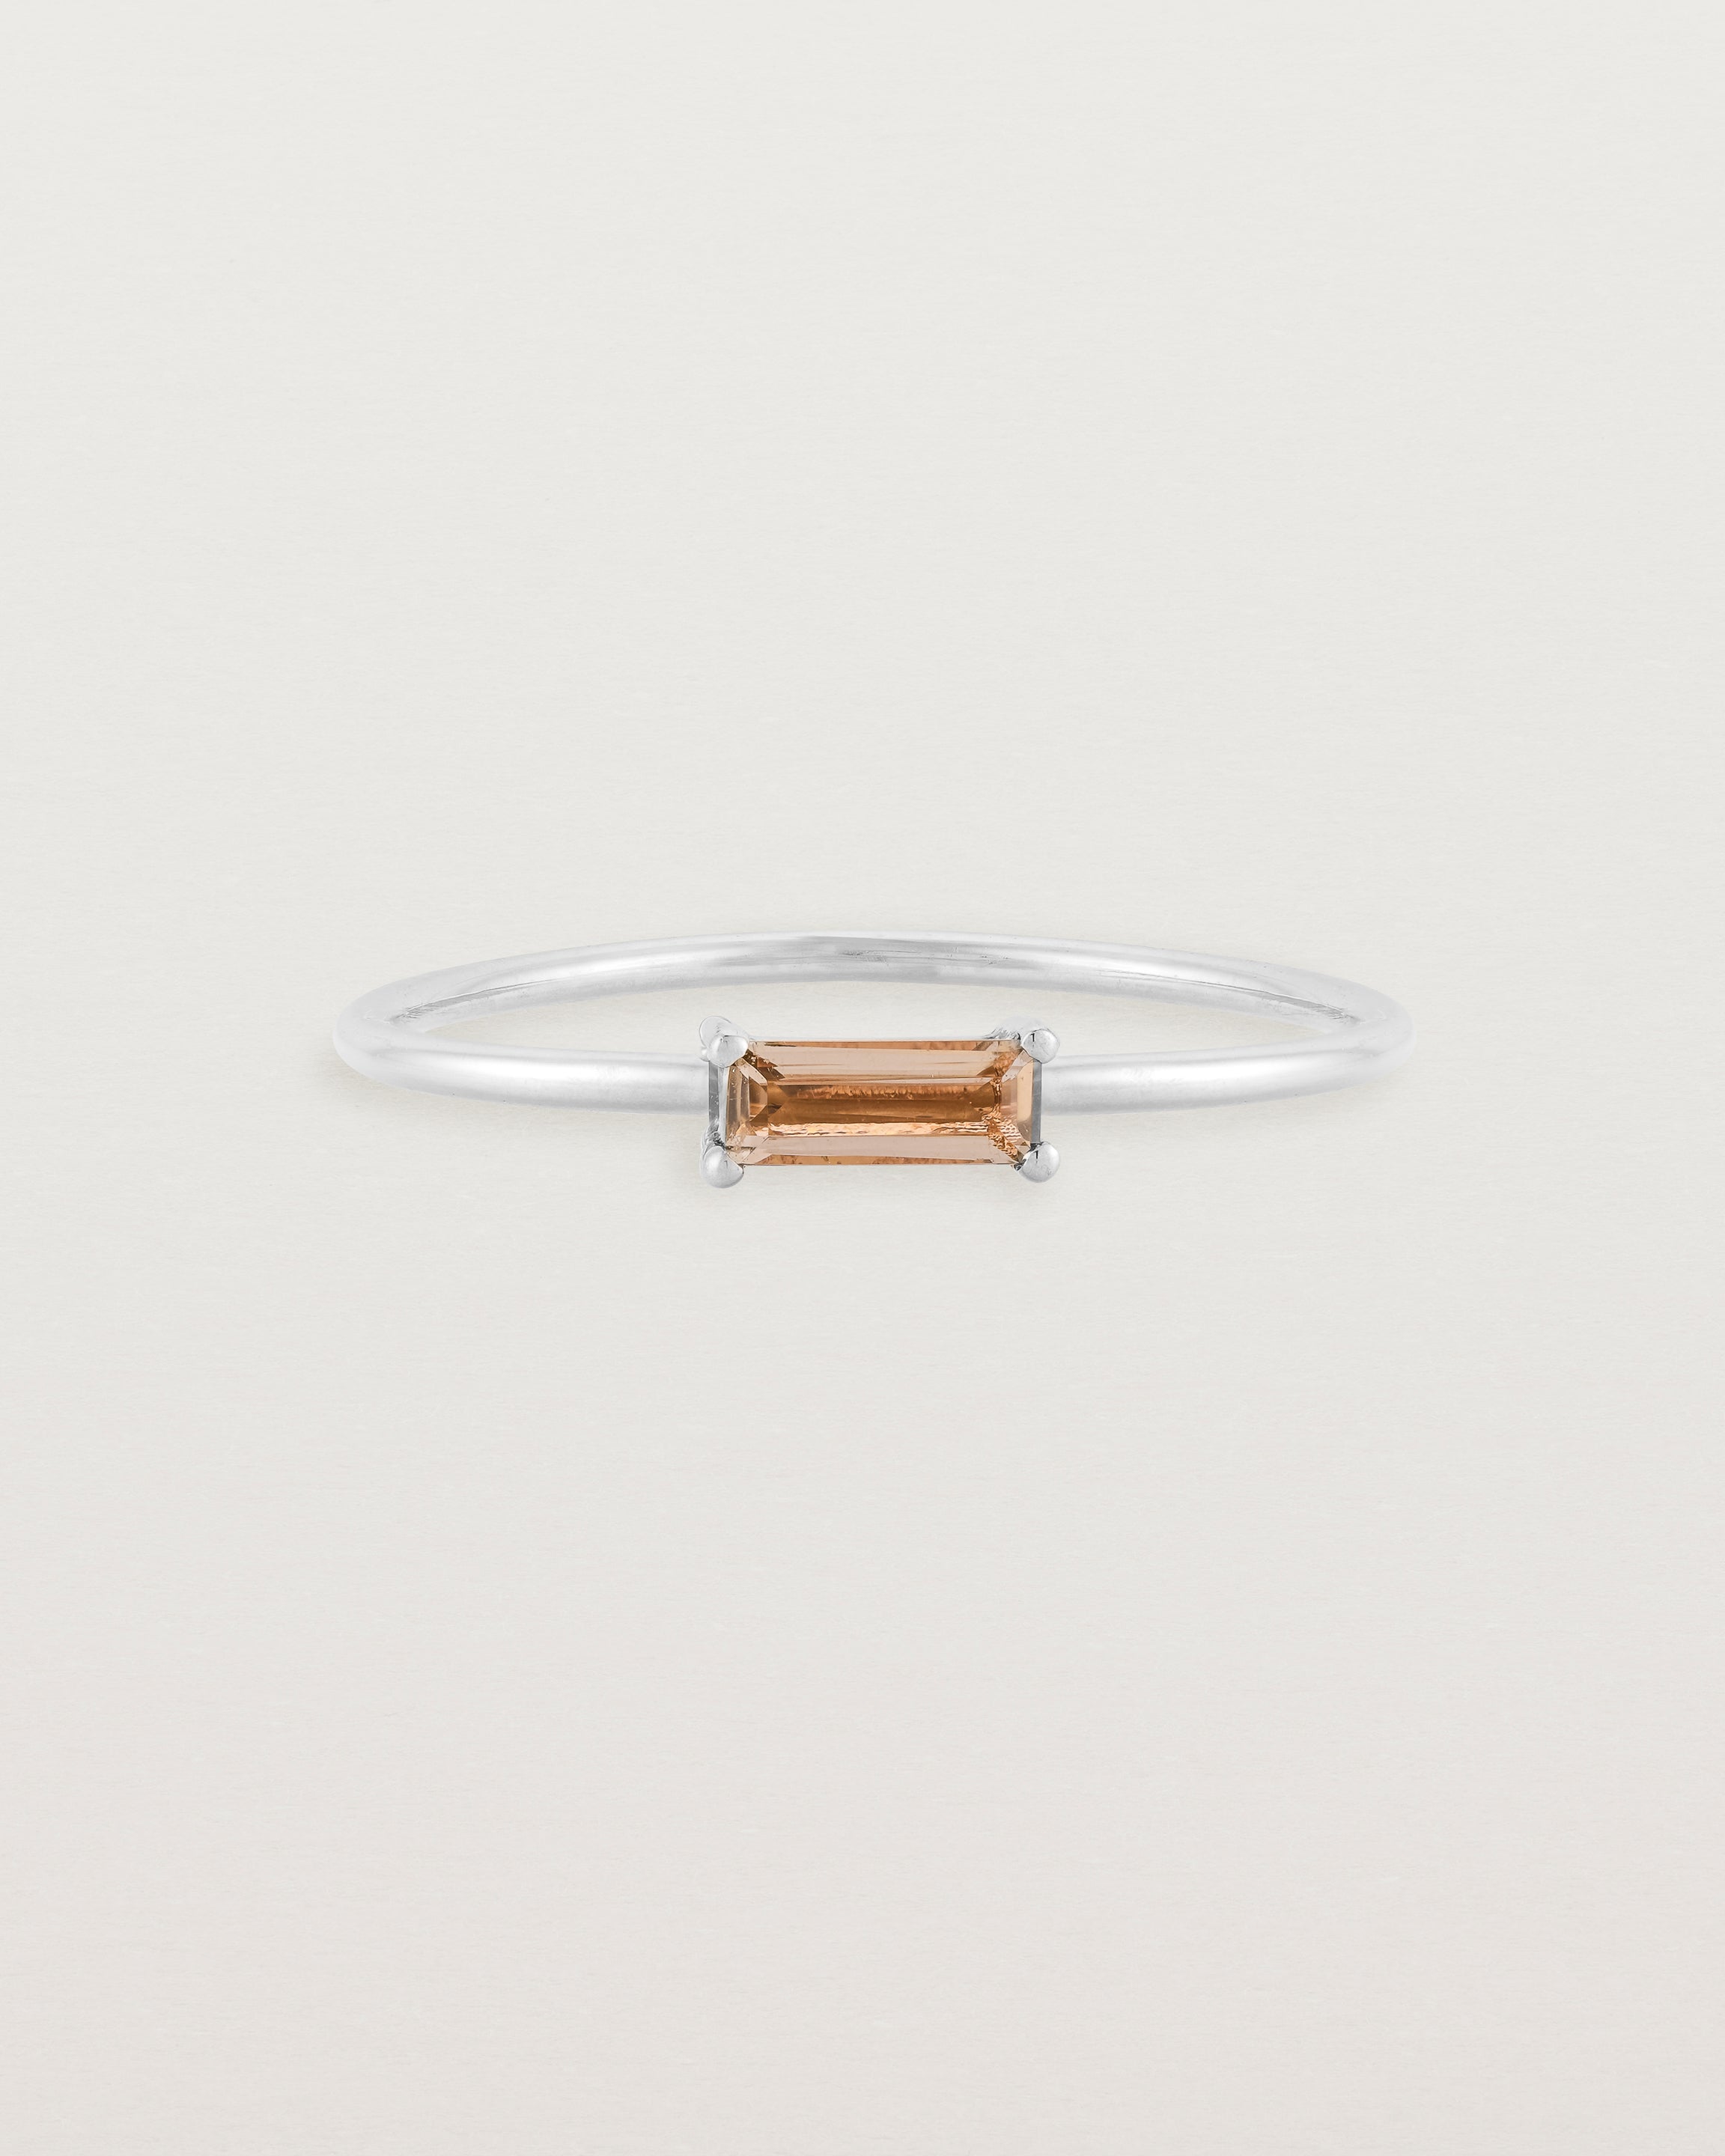 Front view of the Horizontal Baguette Ring | Smokey Quartz in Sterling Silver.